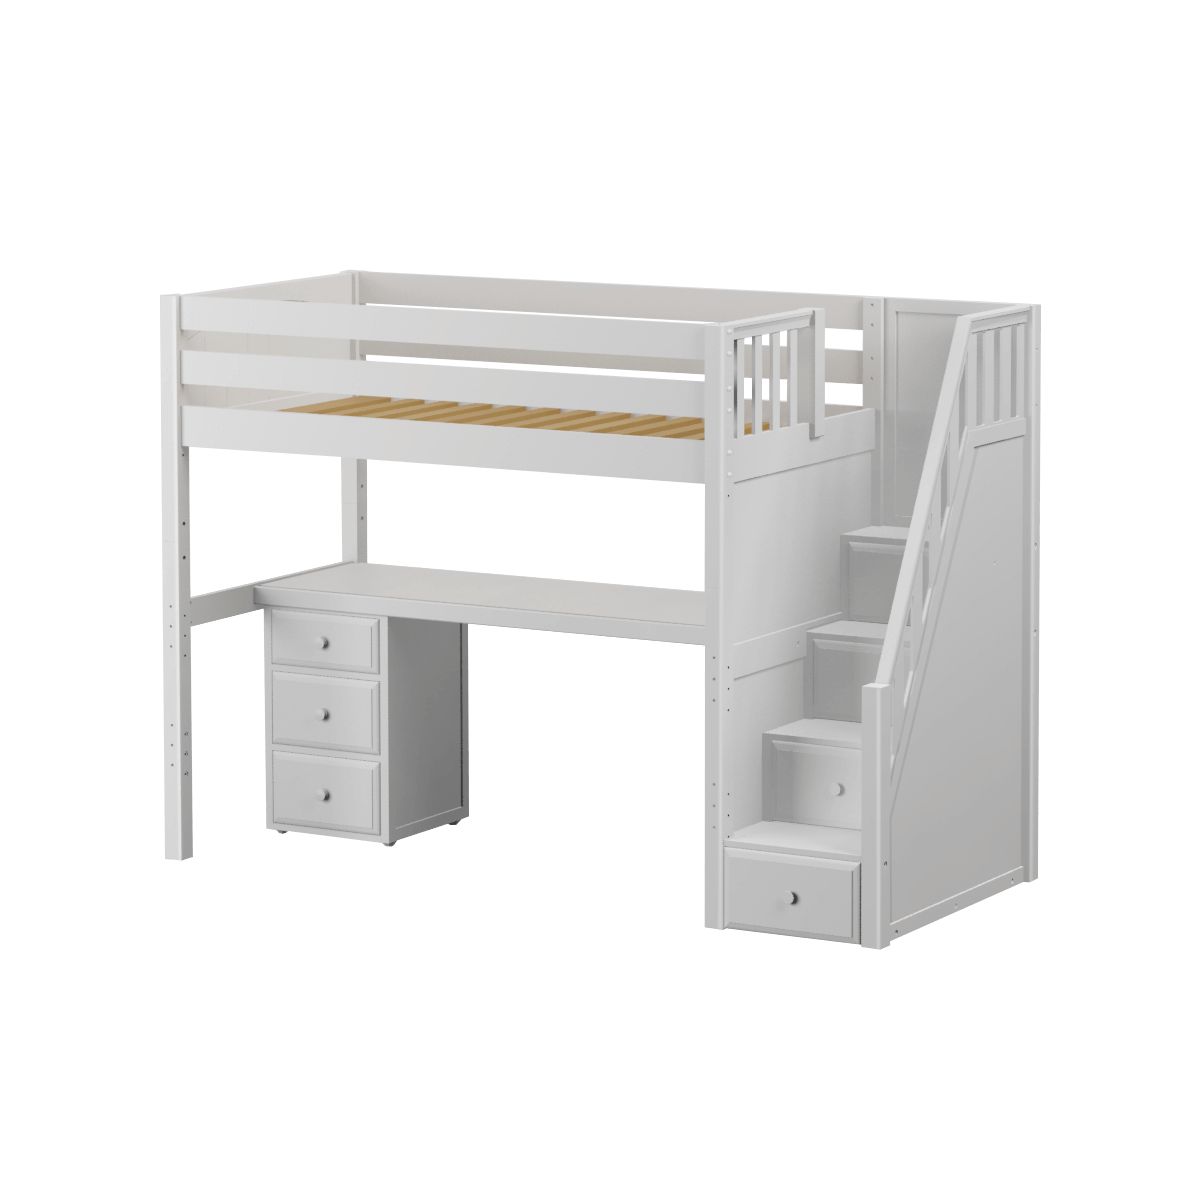 Maxtrix Twin High Loft Bed with Stairs with Long Desk